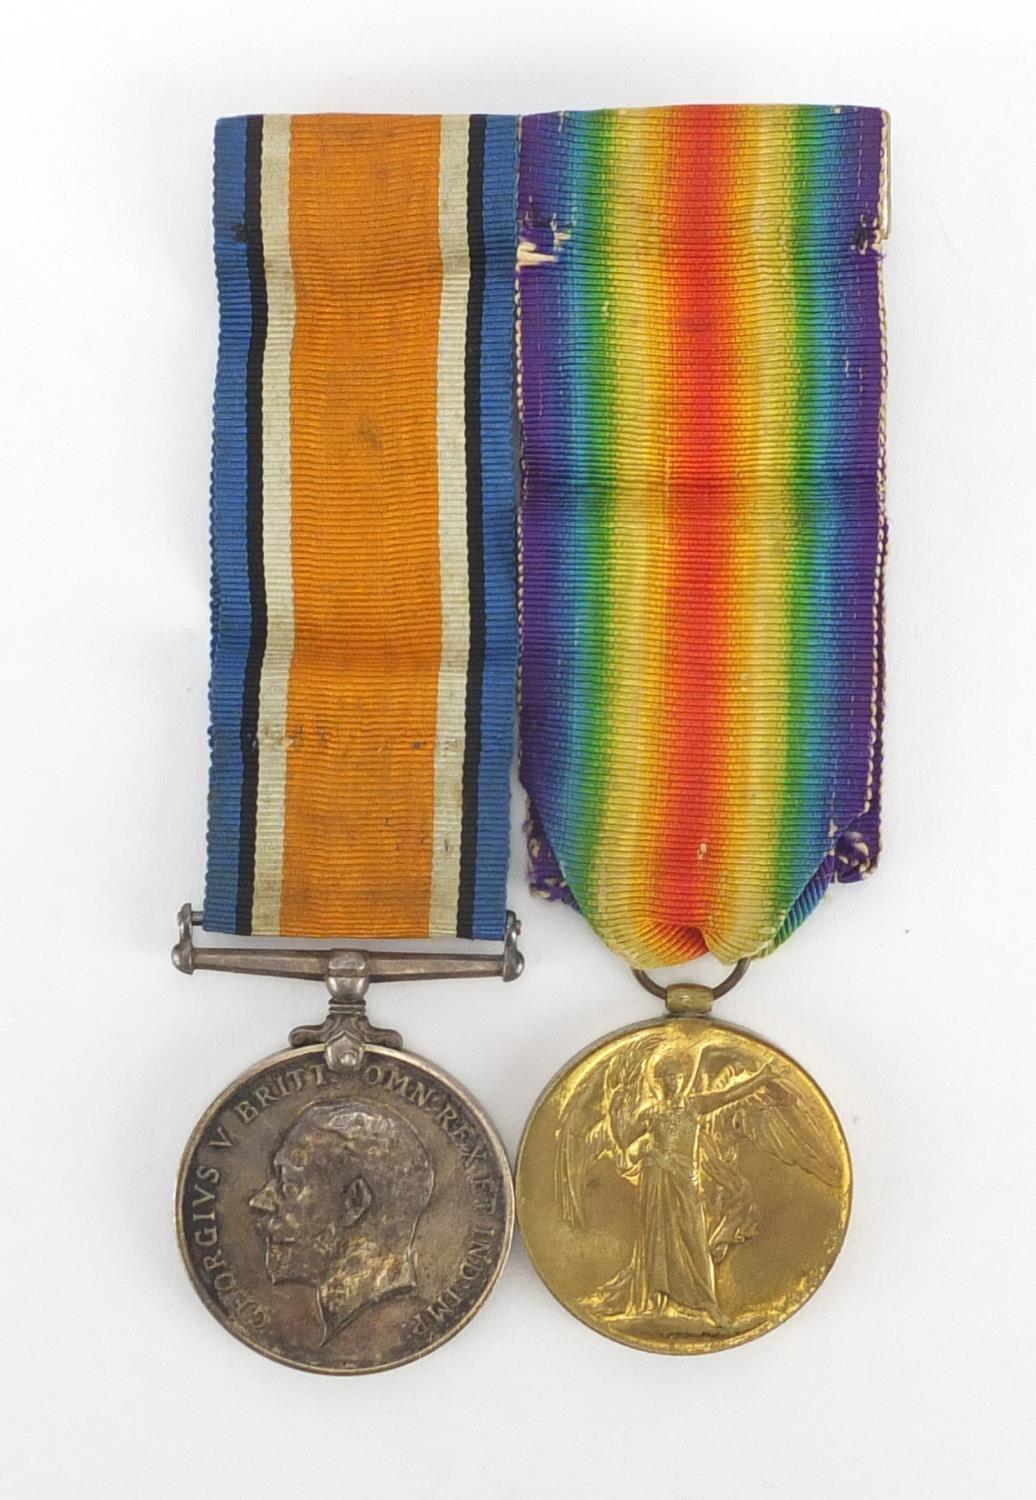 British Military World War pair awarded to M2-178106PTE.E.M.TESTER.A.S.C. : For Extra Condition